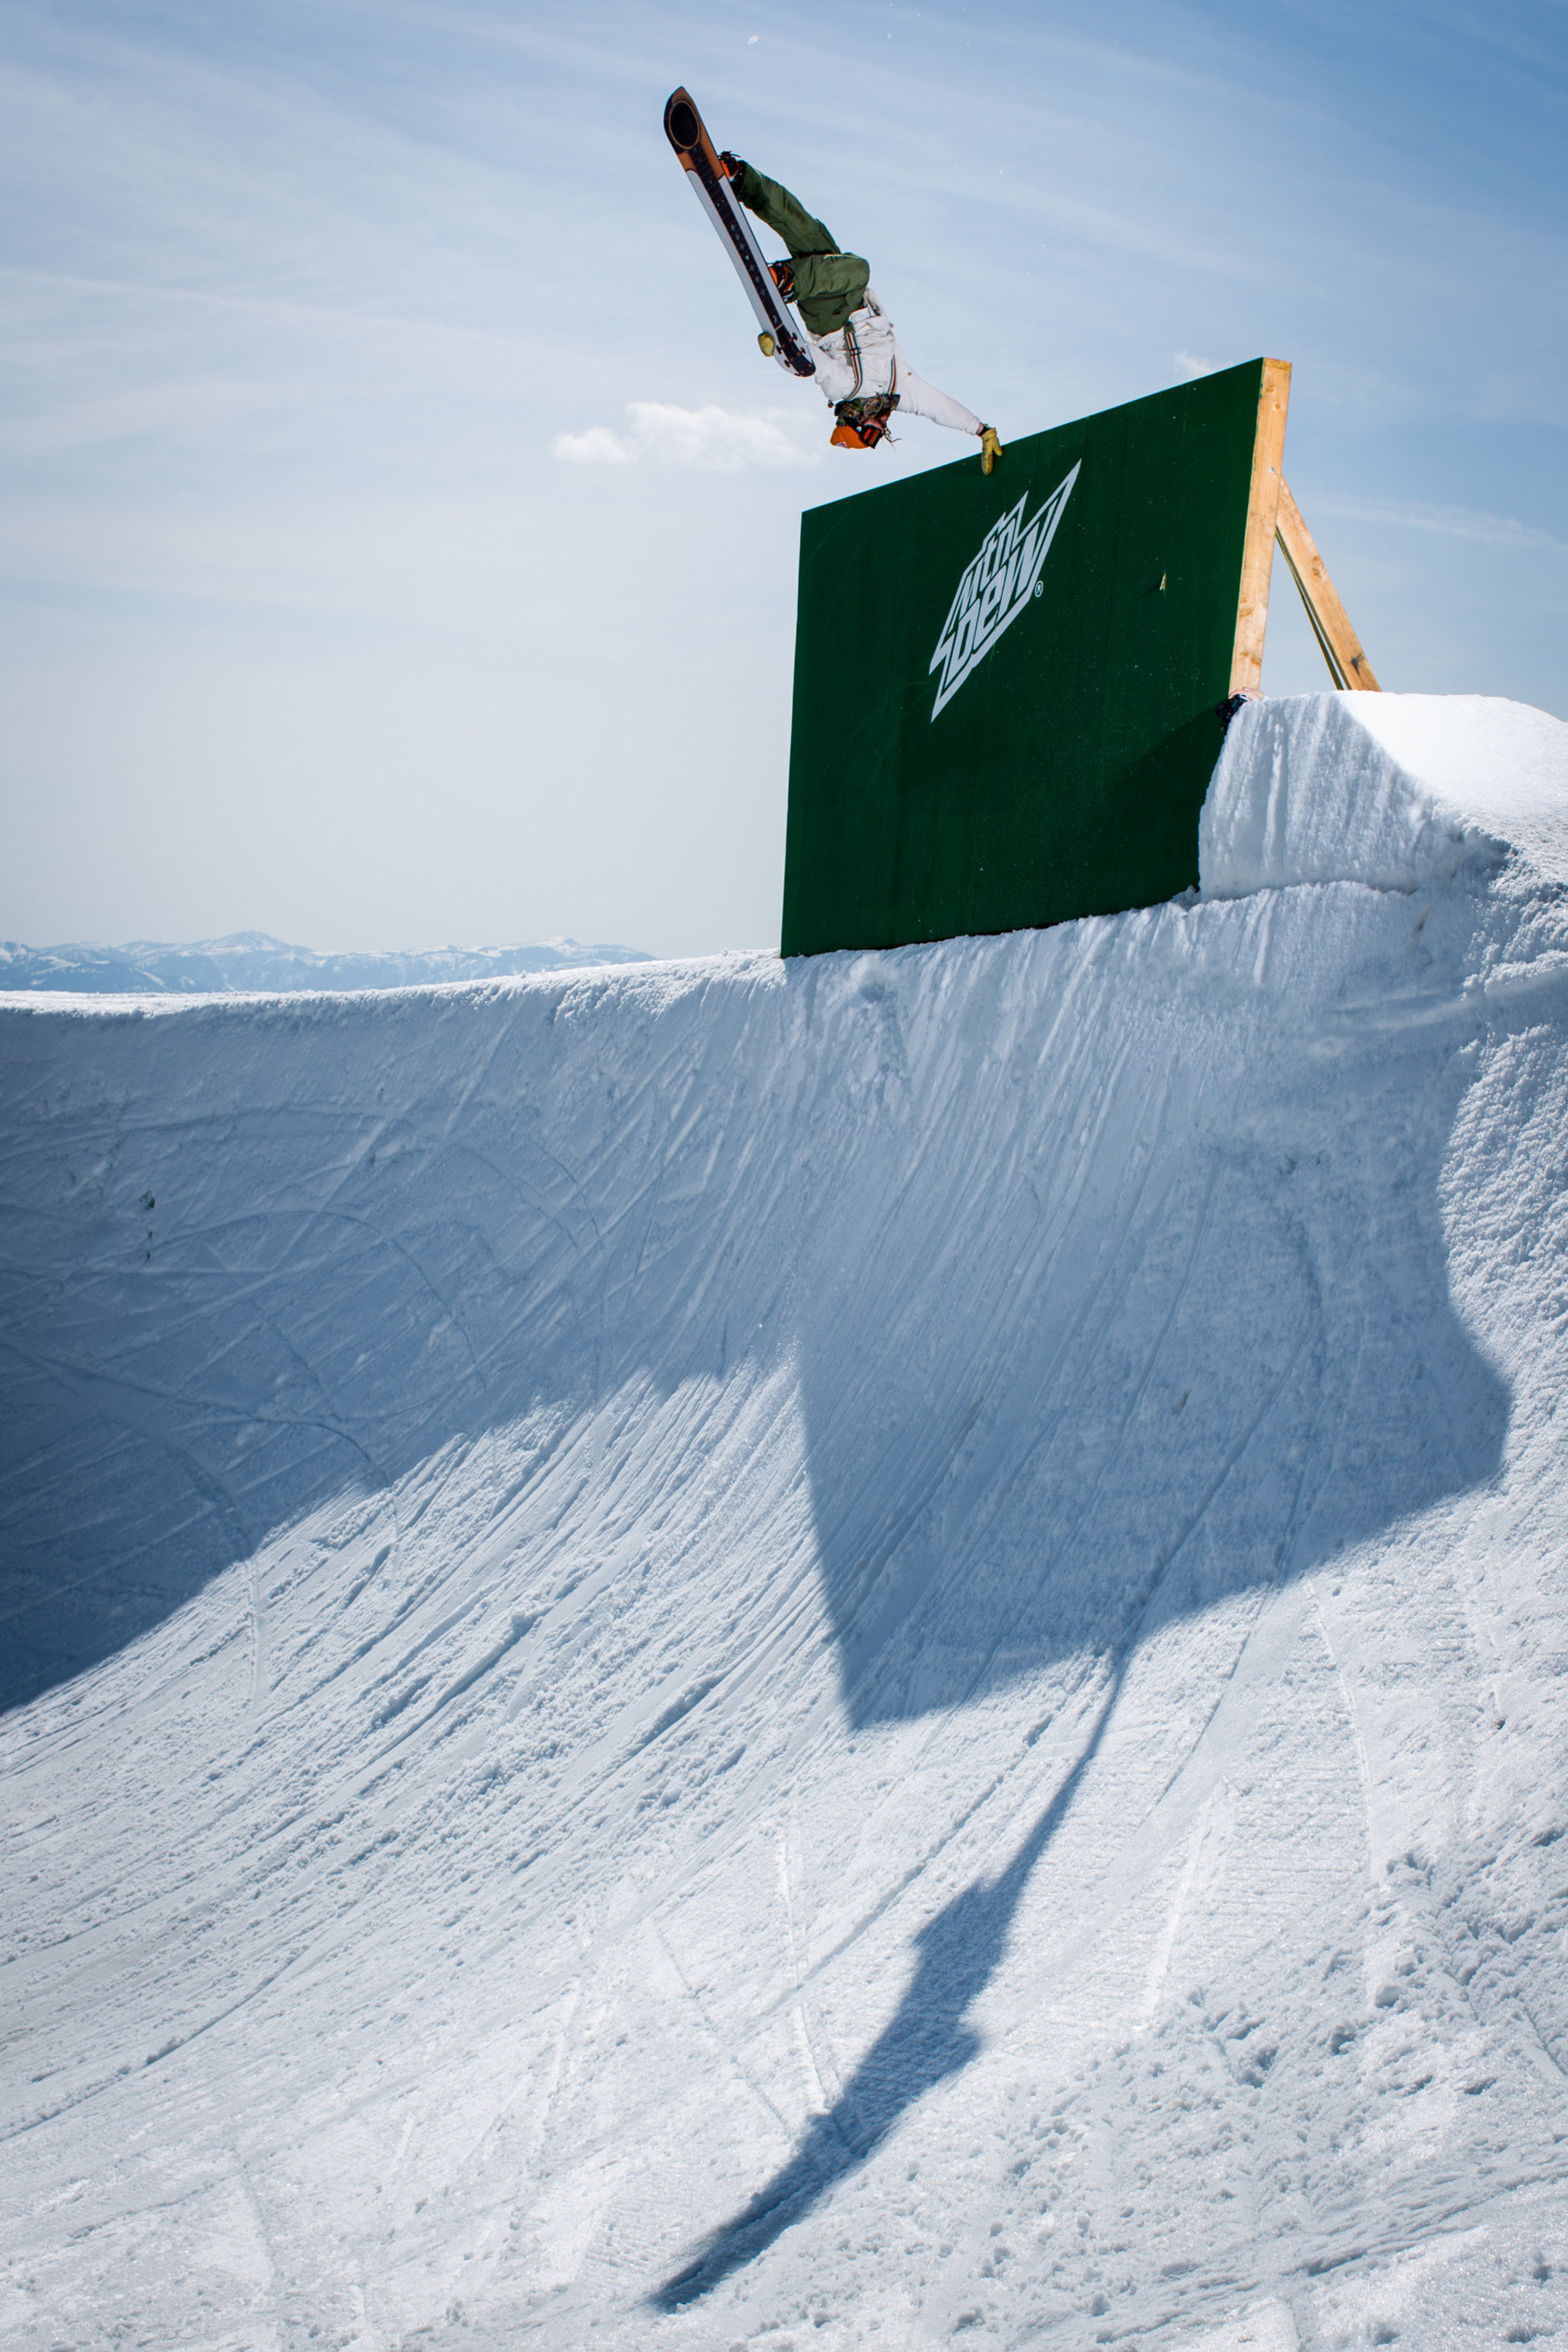 Danny Davis sticks a hand plant in the 22-foot deep bowl at #PeacePark14. This year's build out was co-created by Davis and his sponsors, Mountain Dew and Burton Snowboards, and featured in Wyoming's West Tetons at the Grand Targhee Resort. Photo Credit: Adam Moran